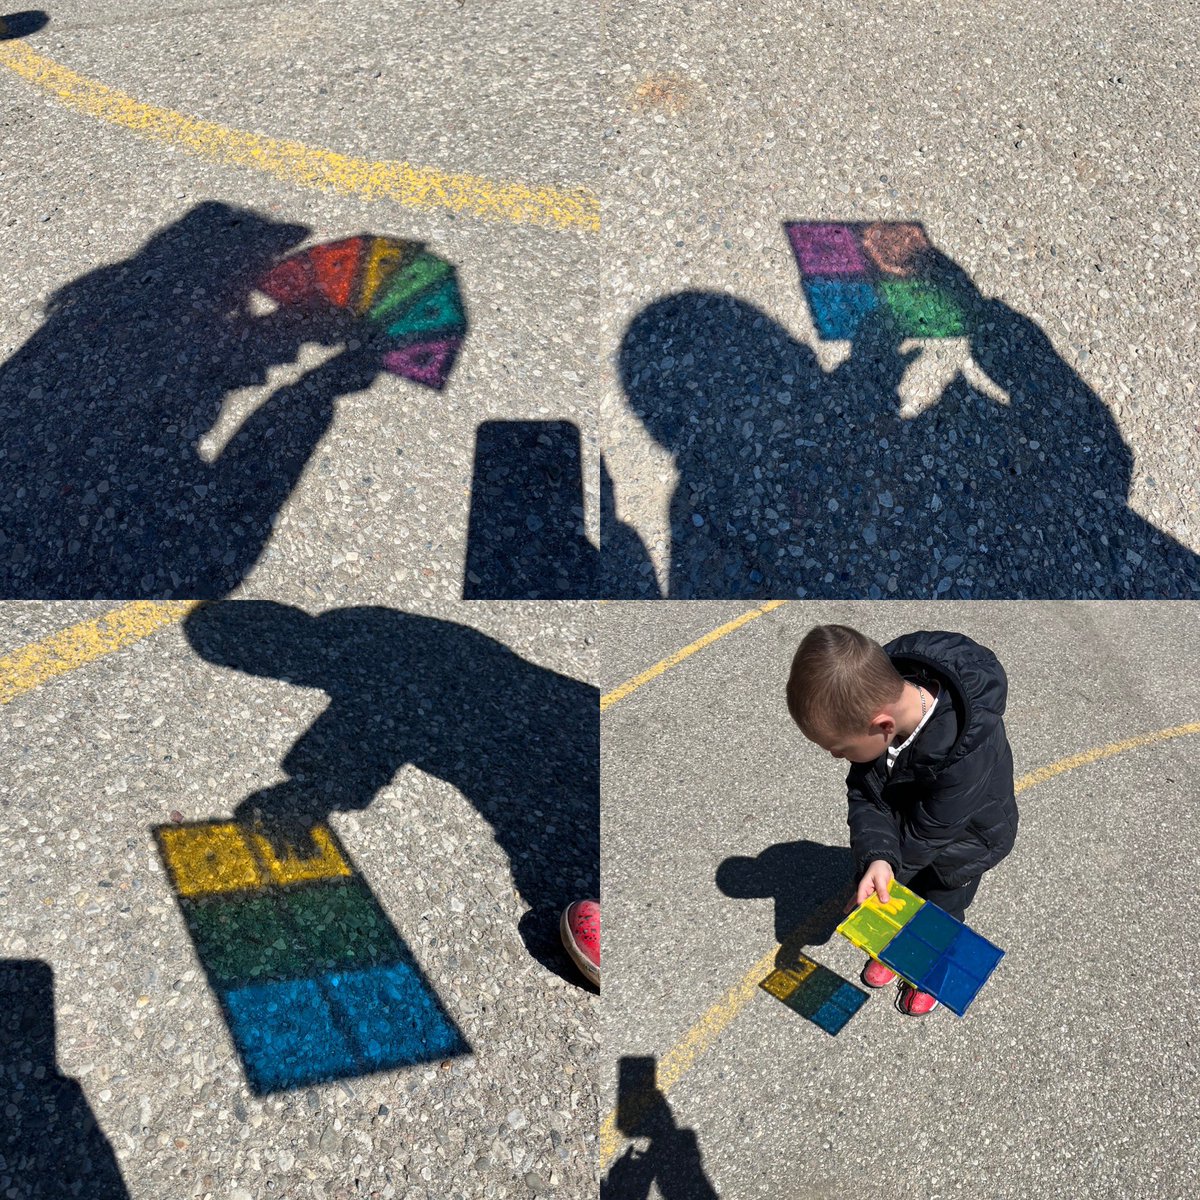 One friend noticed when the sun ☀️ shone through her water bottle she could see the colour on the ground. We wondered what else we had would do the same thing! ❤️ @PrincipalJLMit1 @GEDSB